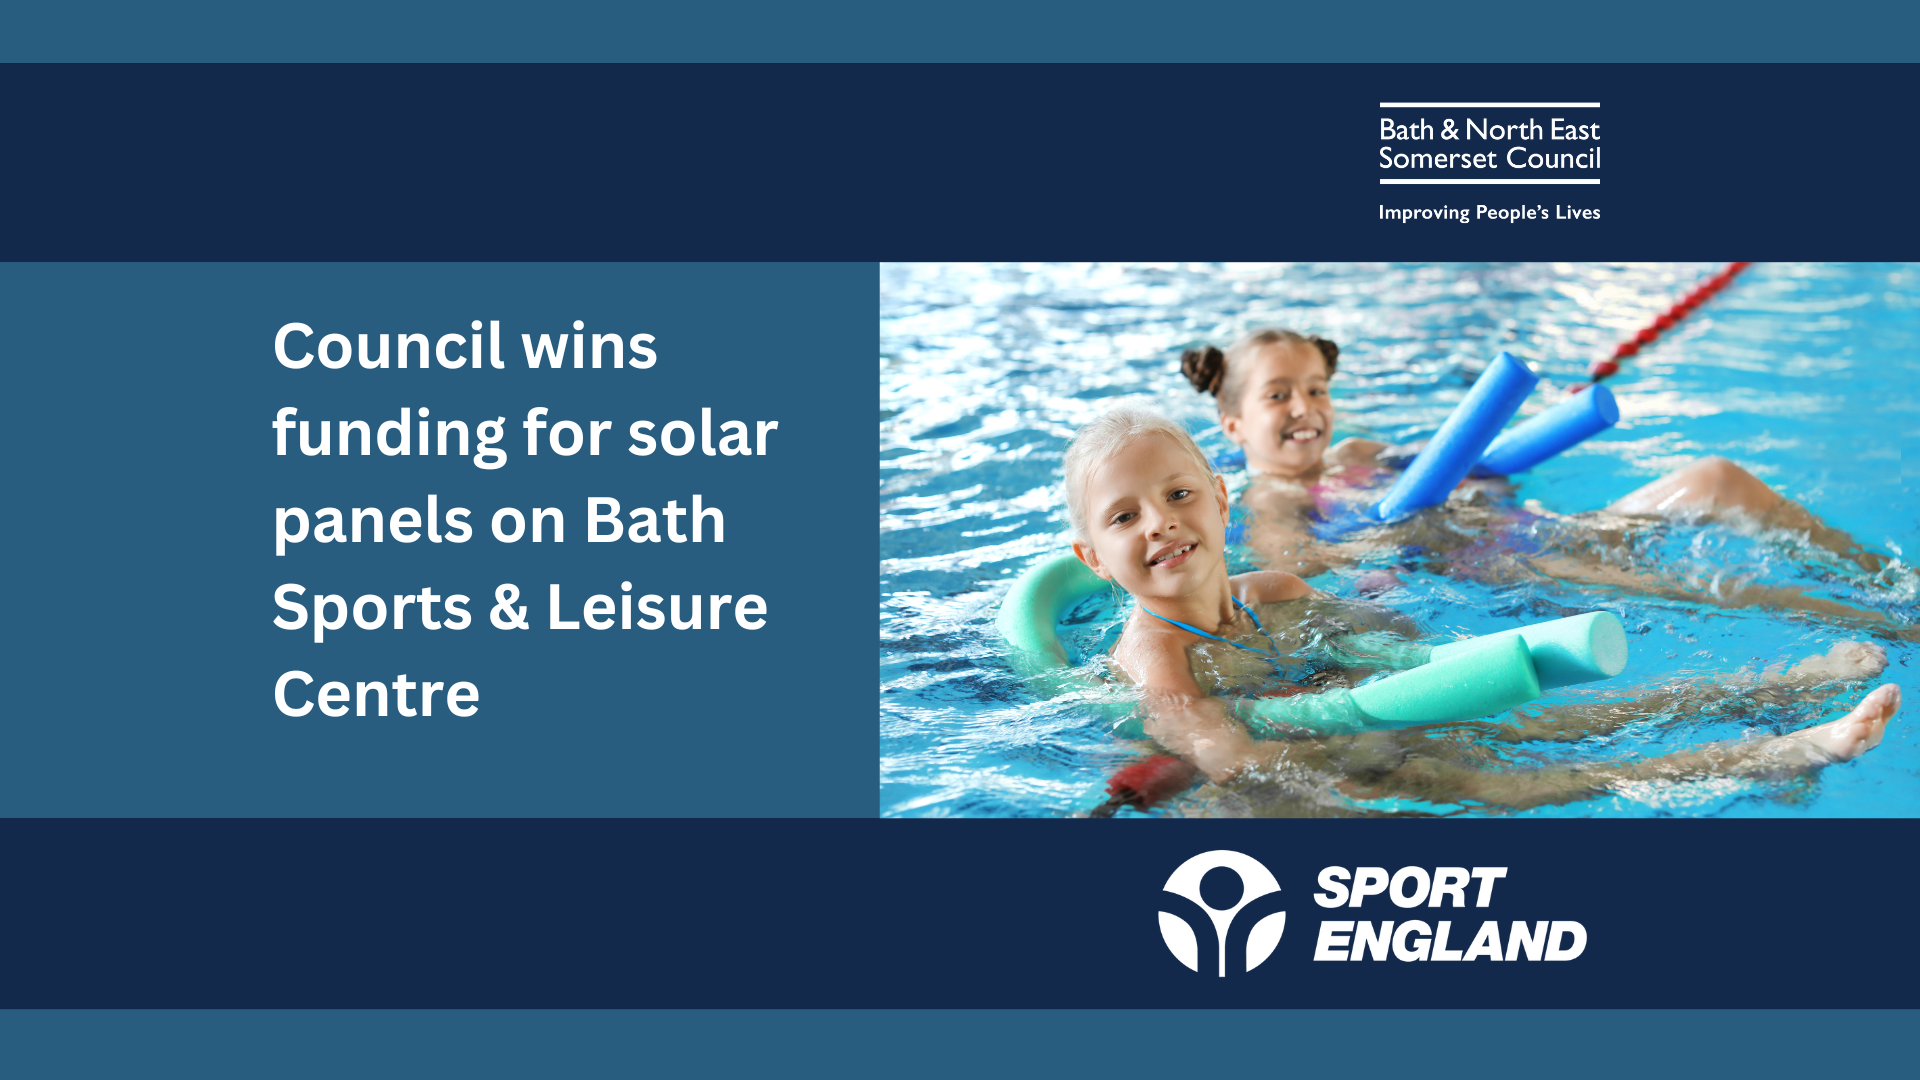 text about funding award and an image of two young girls in a swimming pool with floats